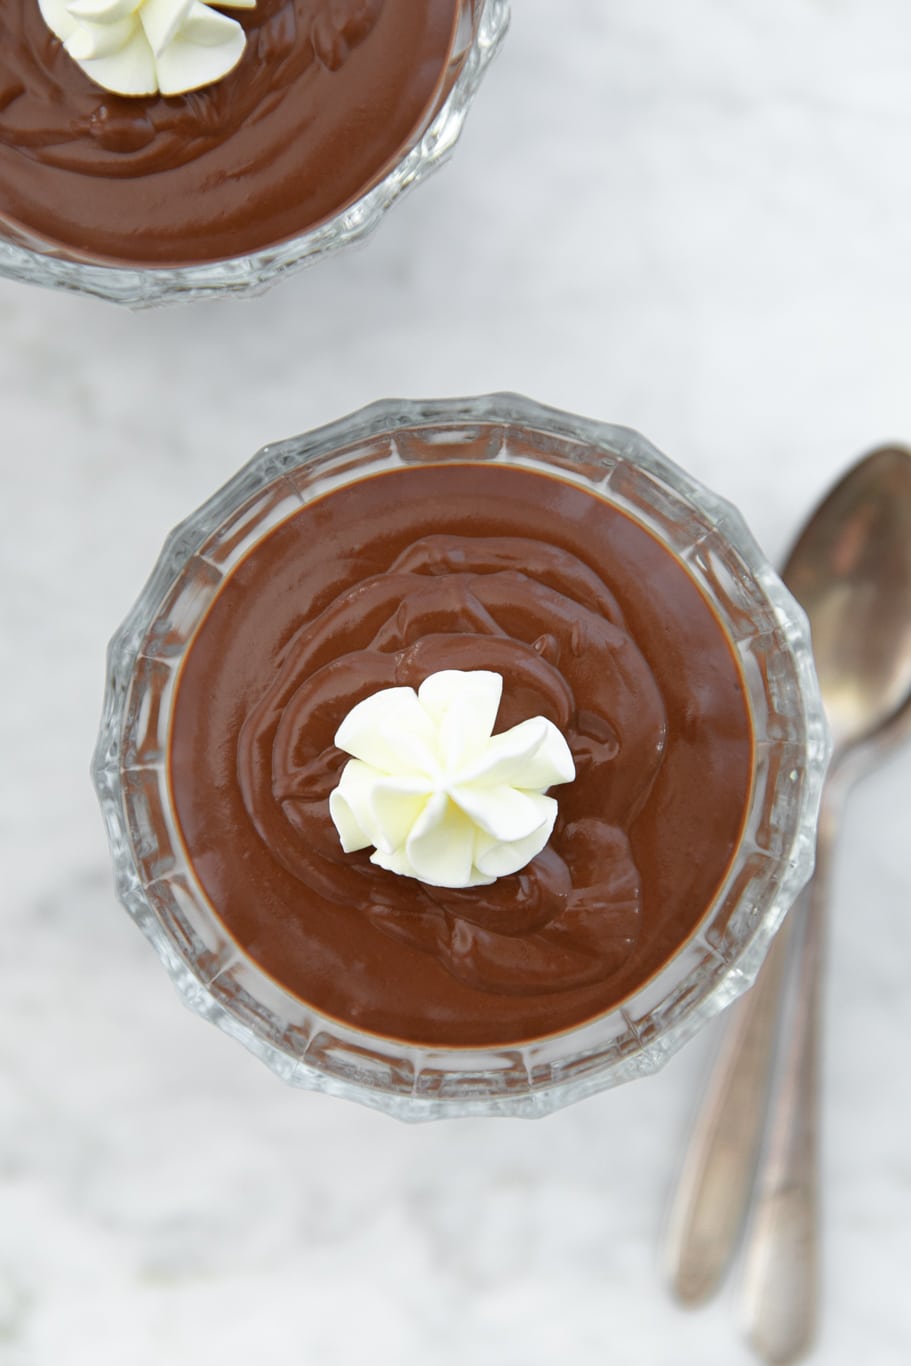 Glass bowls with double-chocolate pudding (budino) and whipped cream on top